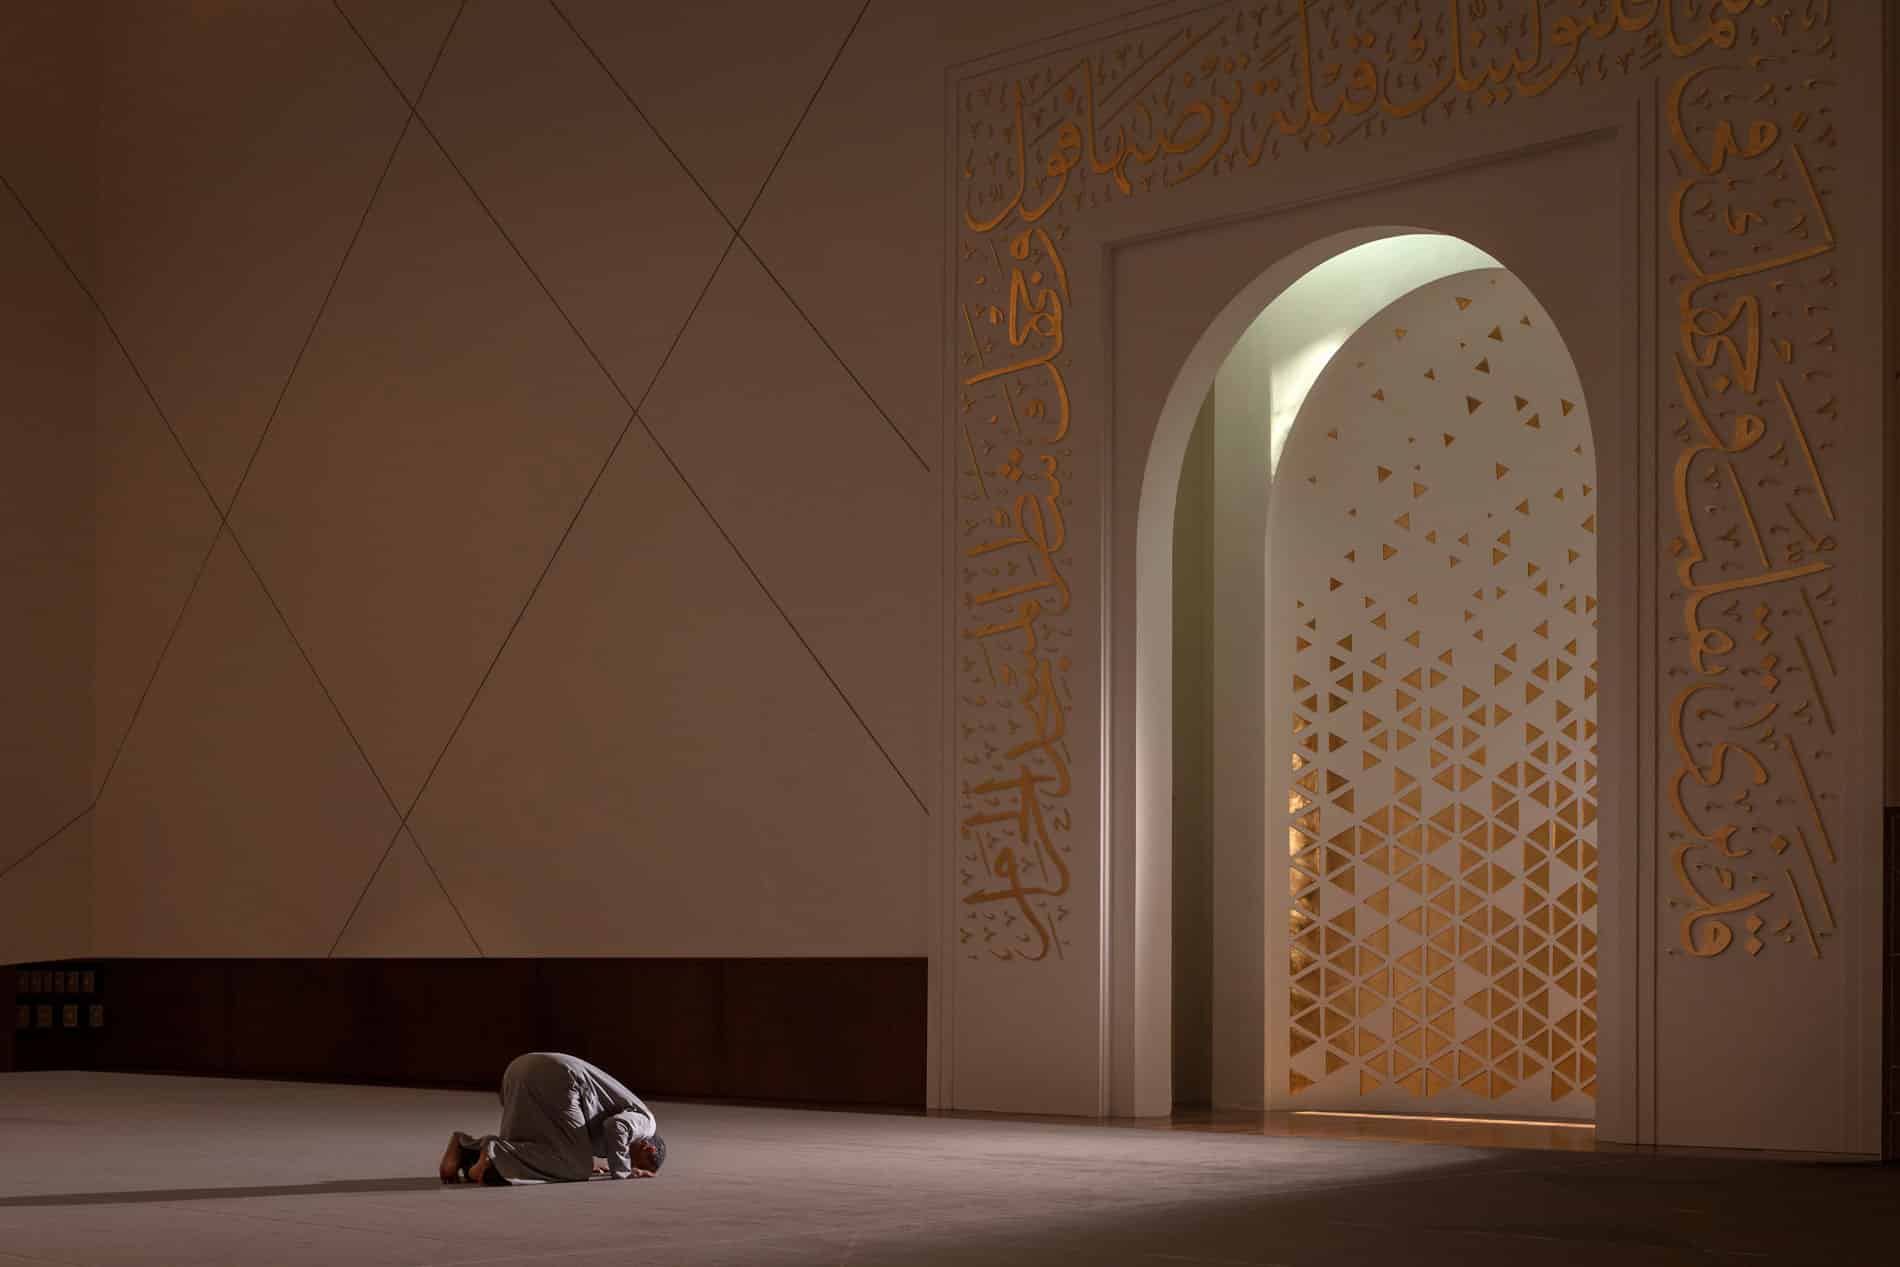 Mosque of Light, designed by Dabbagh Architects with award winning photo by Gerry O’Leary